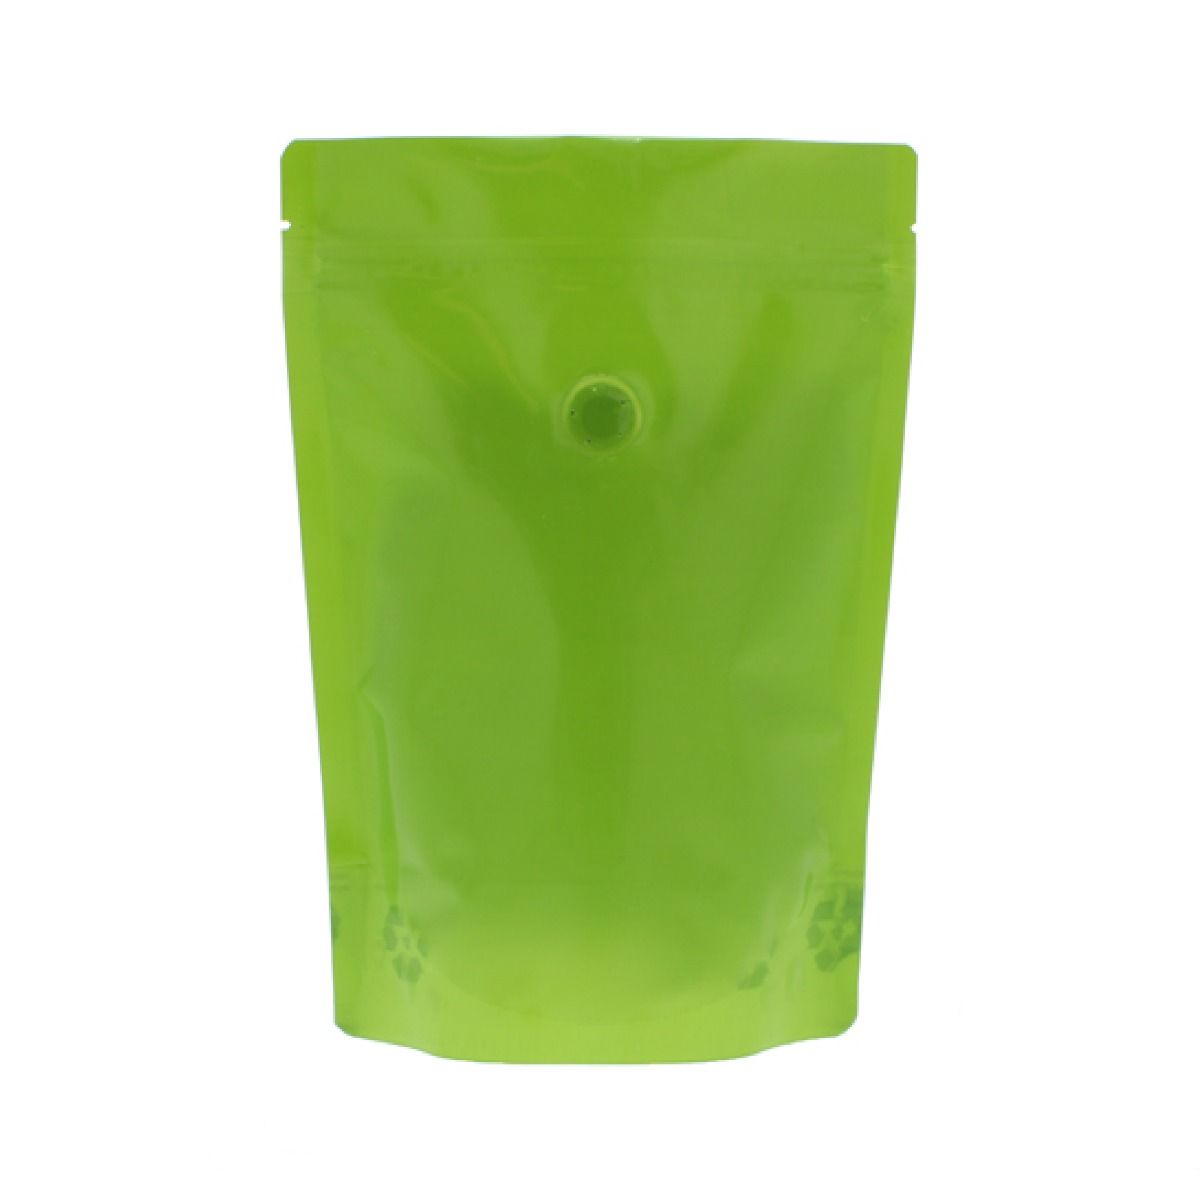 Coffee pouch - shiny green